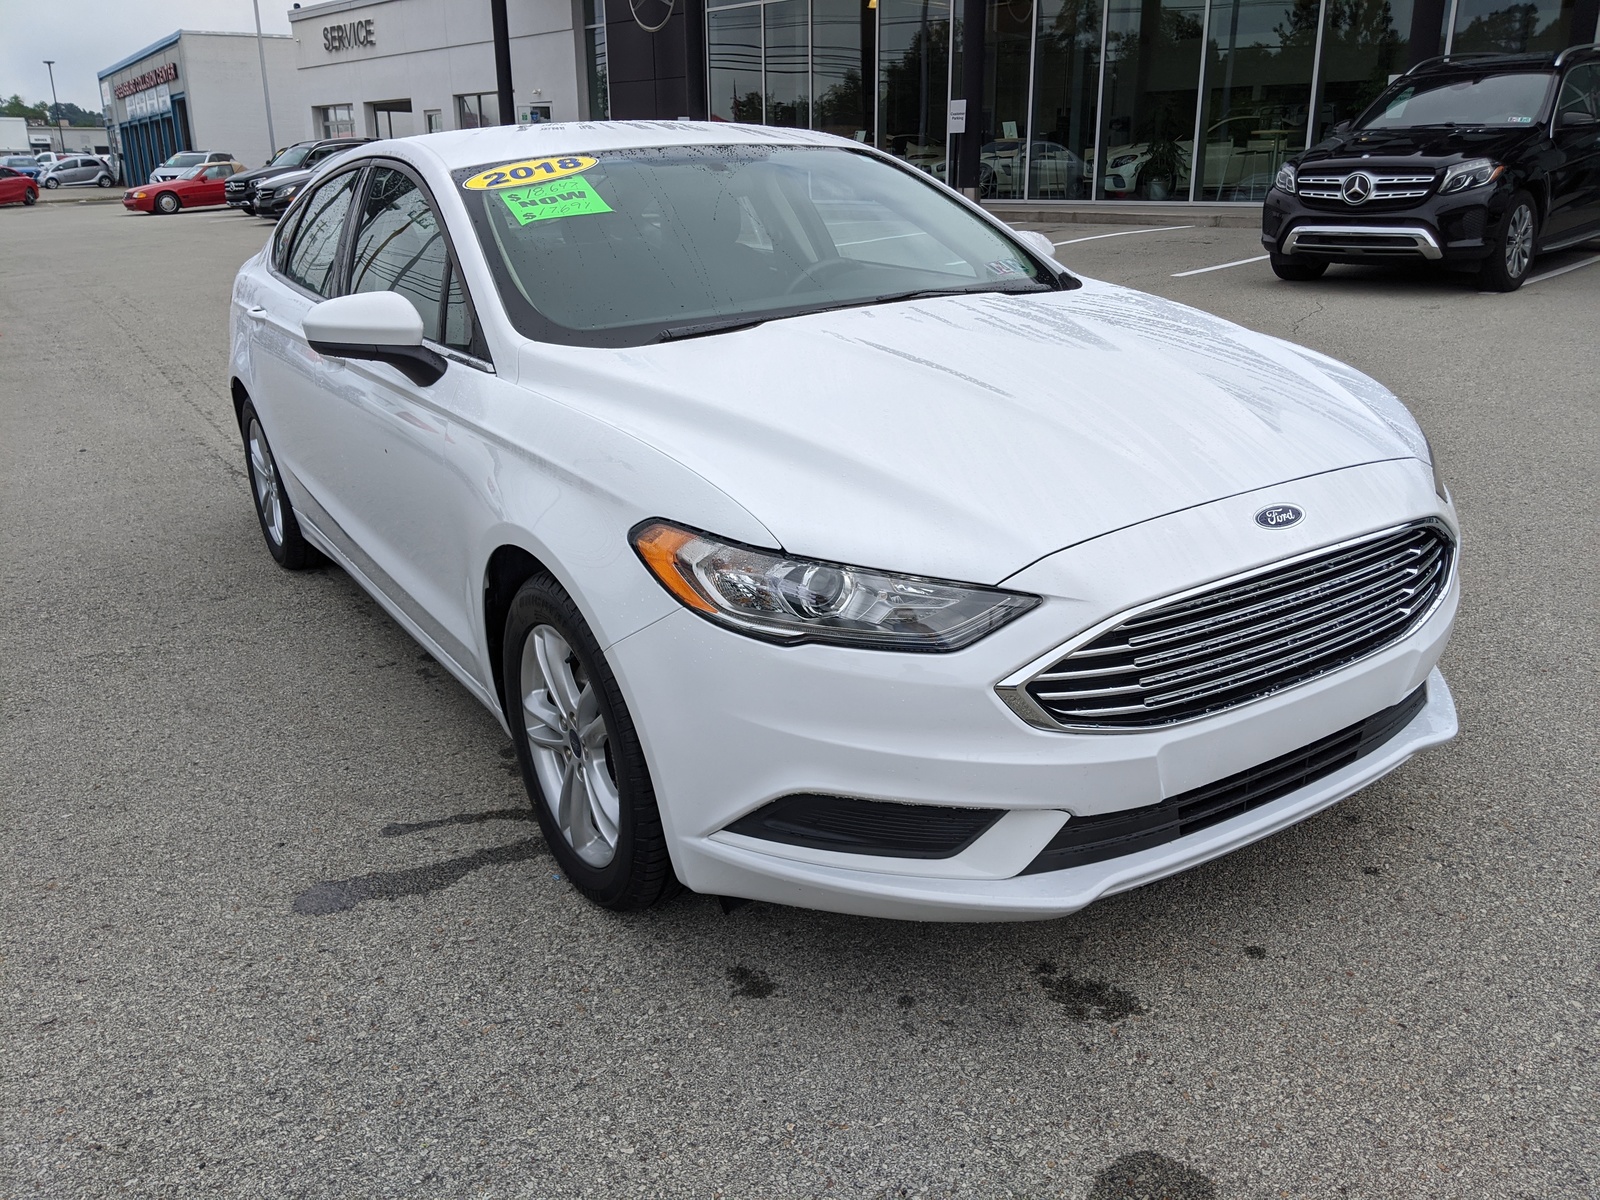 Pre-Owned 2018 Ford Fusion SE in Oxford White | Greensburg, PA | #B81086R